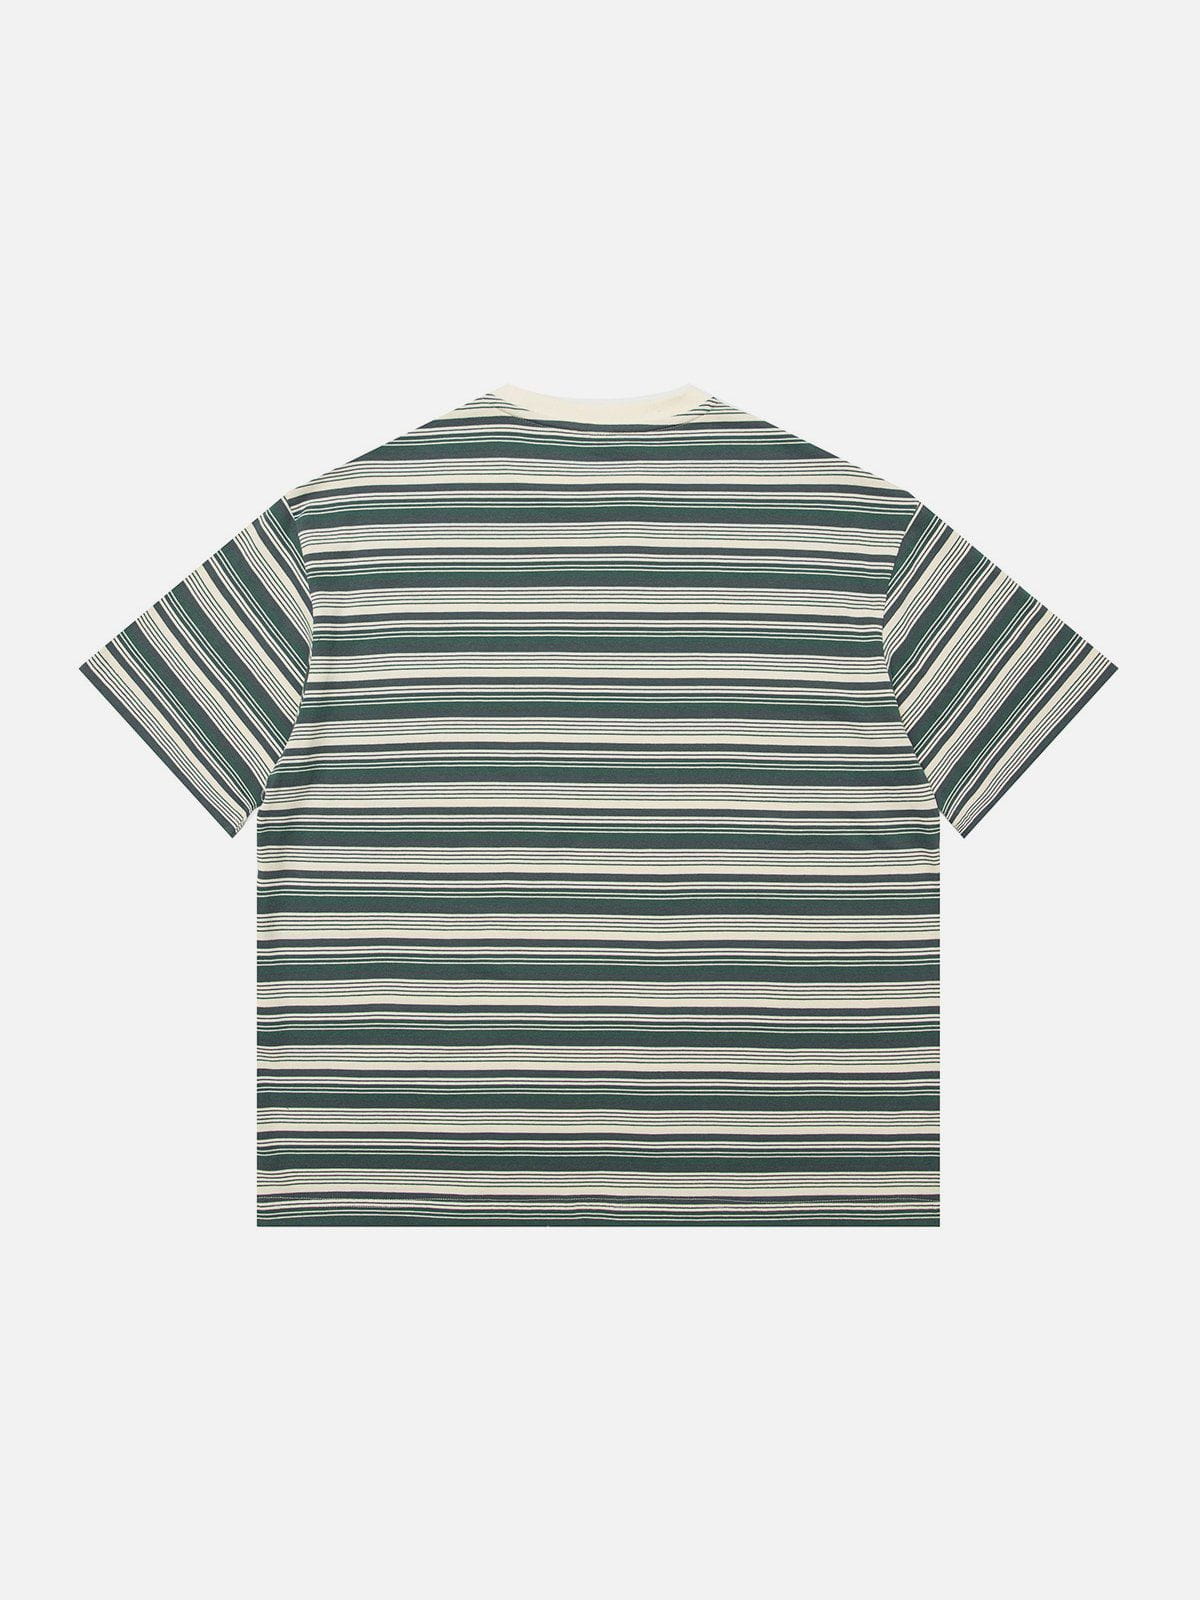 Sneakerland™ - Color Clash Stripes Tee